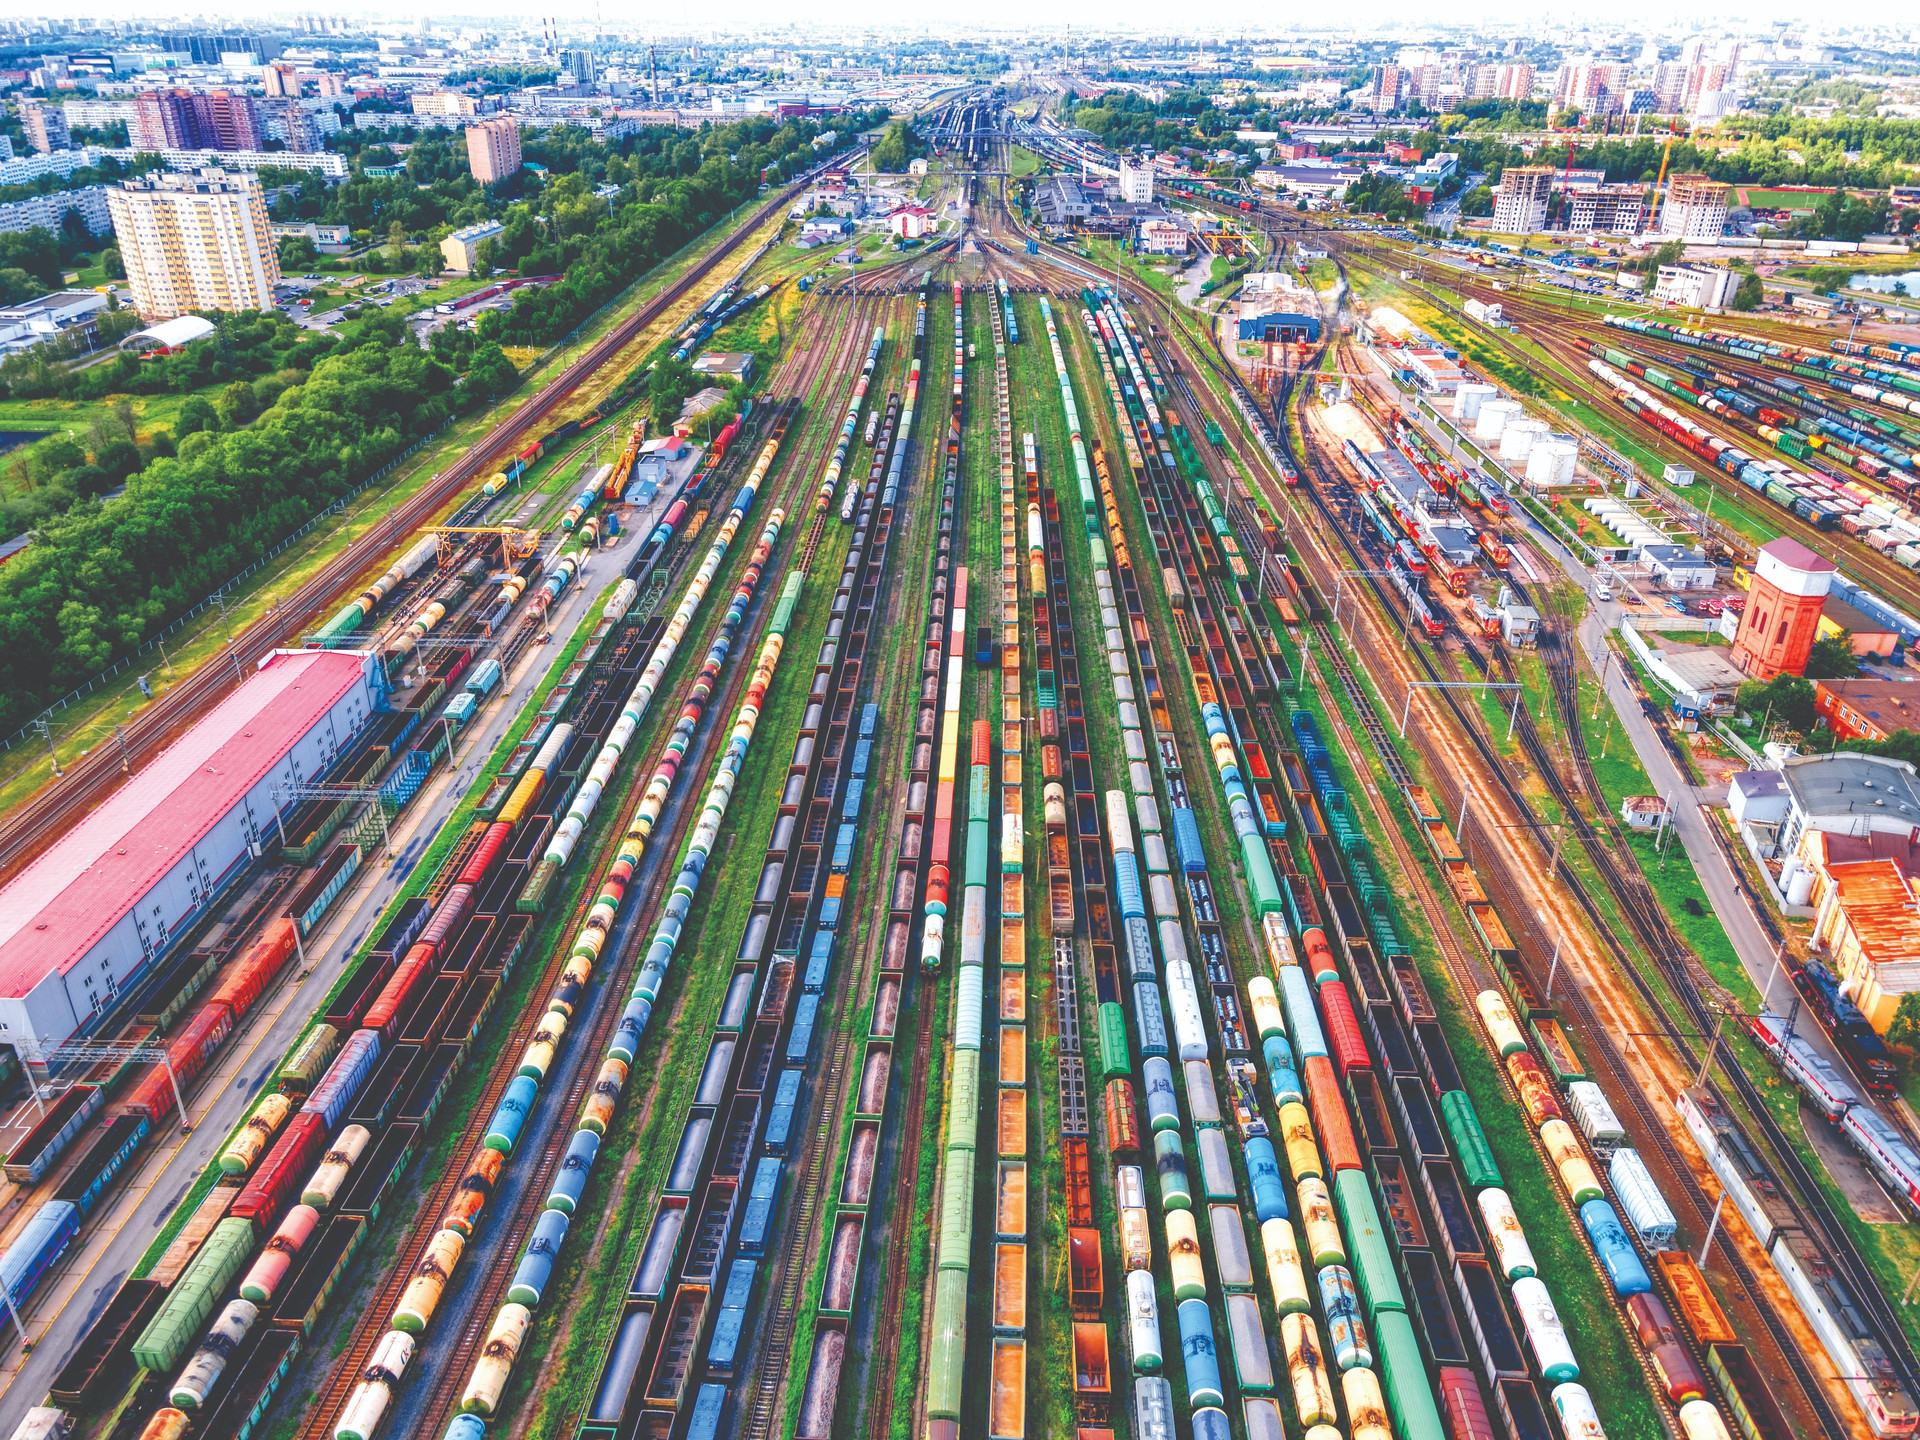 aerial-top-view-railways-with-cargo-wagons-transportation-various-goods-by-rail-compressed.jpg